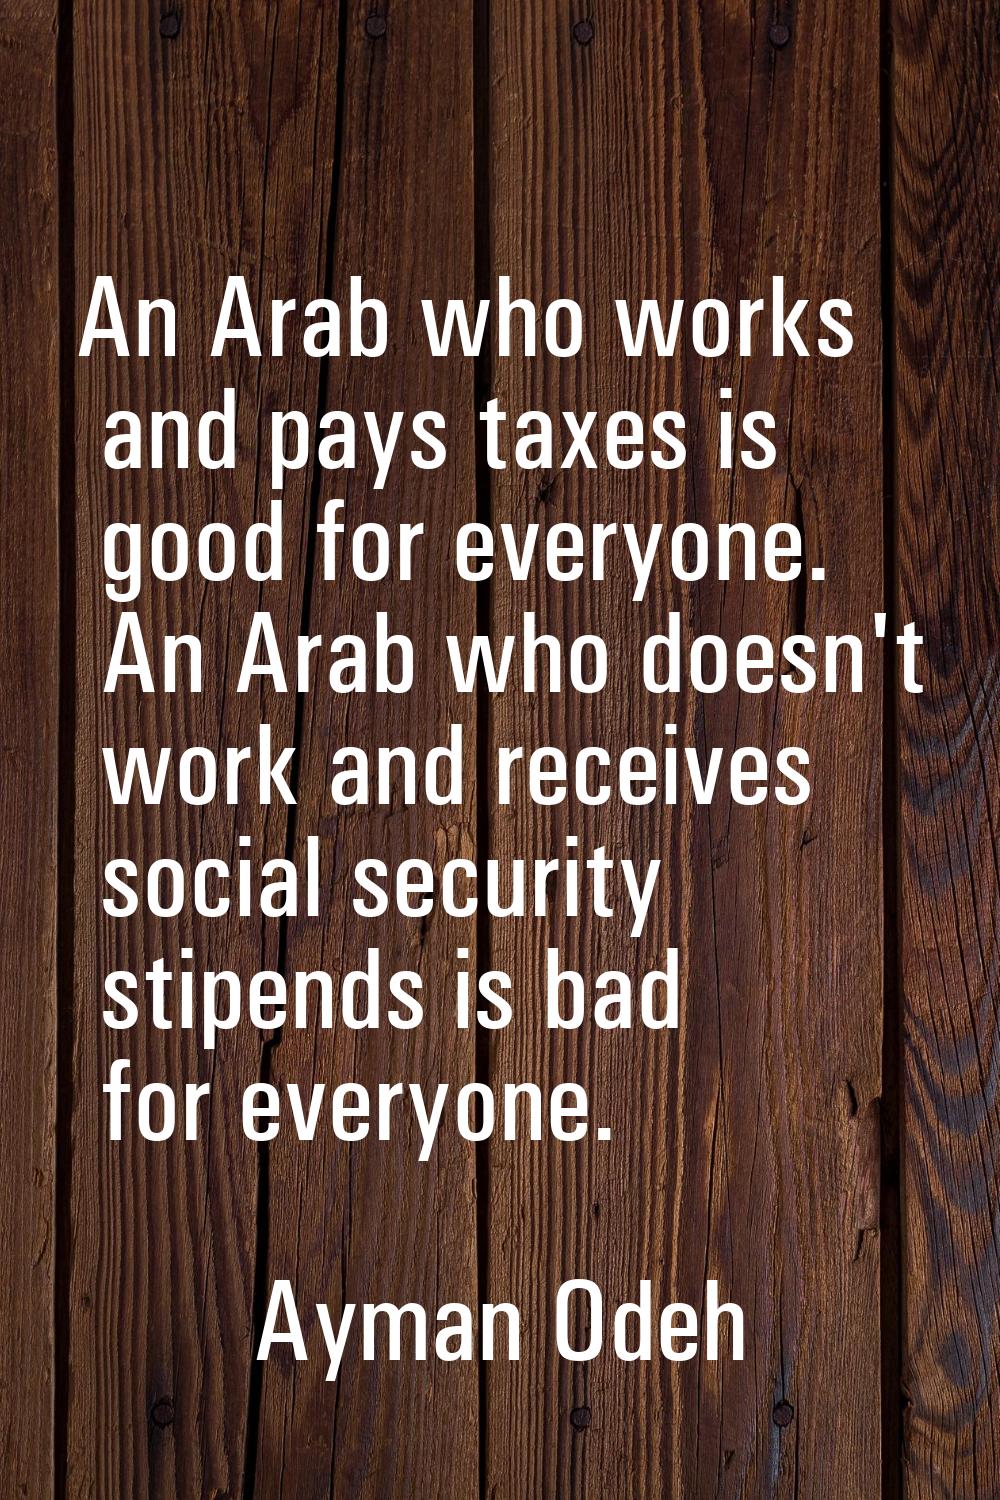 An Arab who works and pays taxes is good for everyone. An Arab who doesn't work and receives social